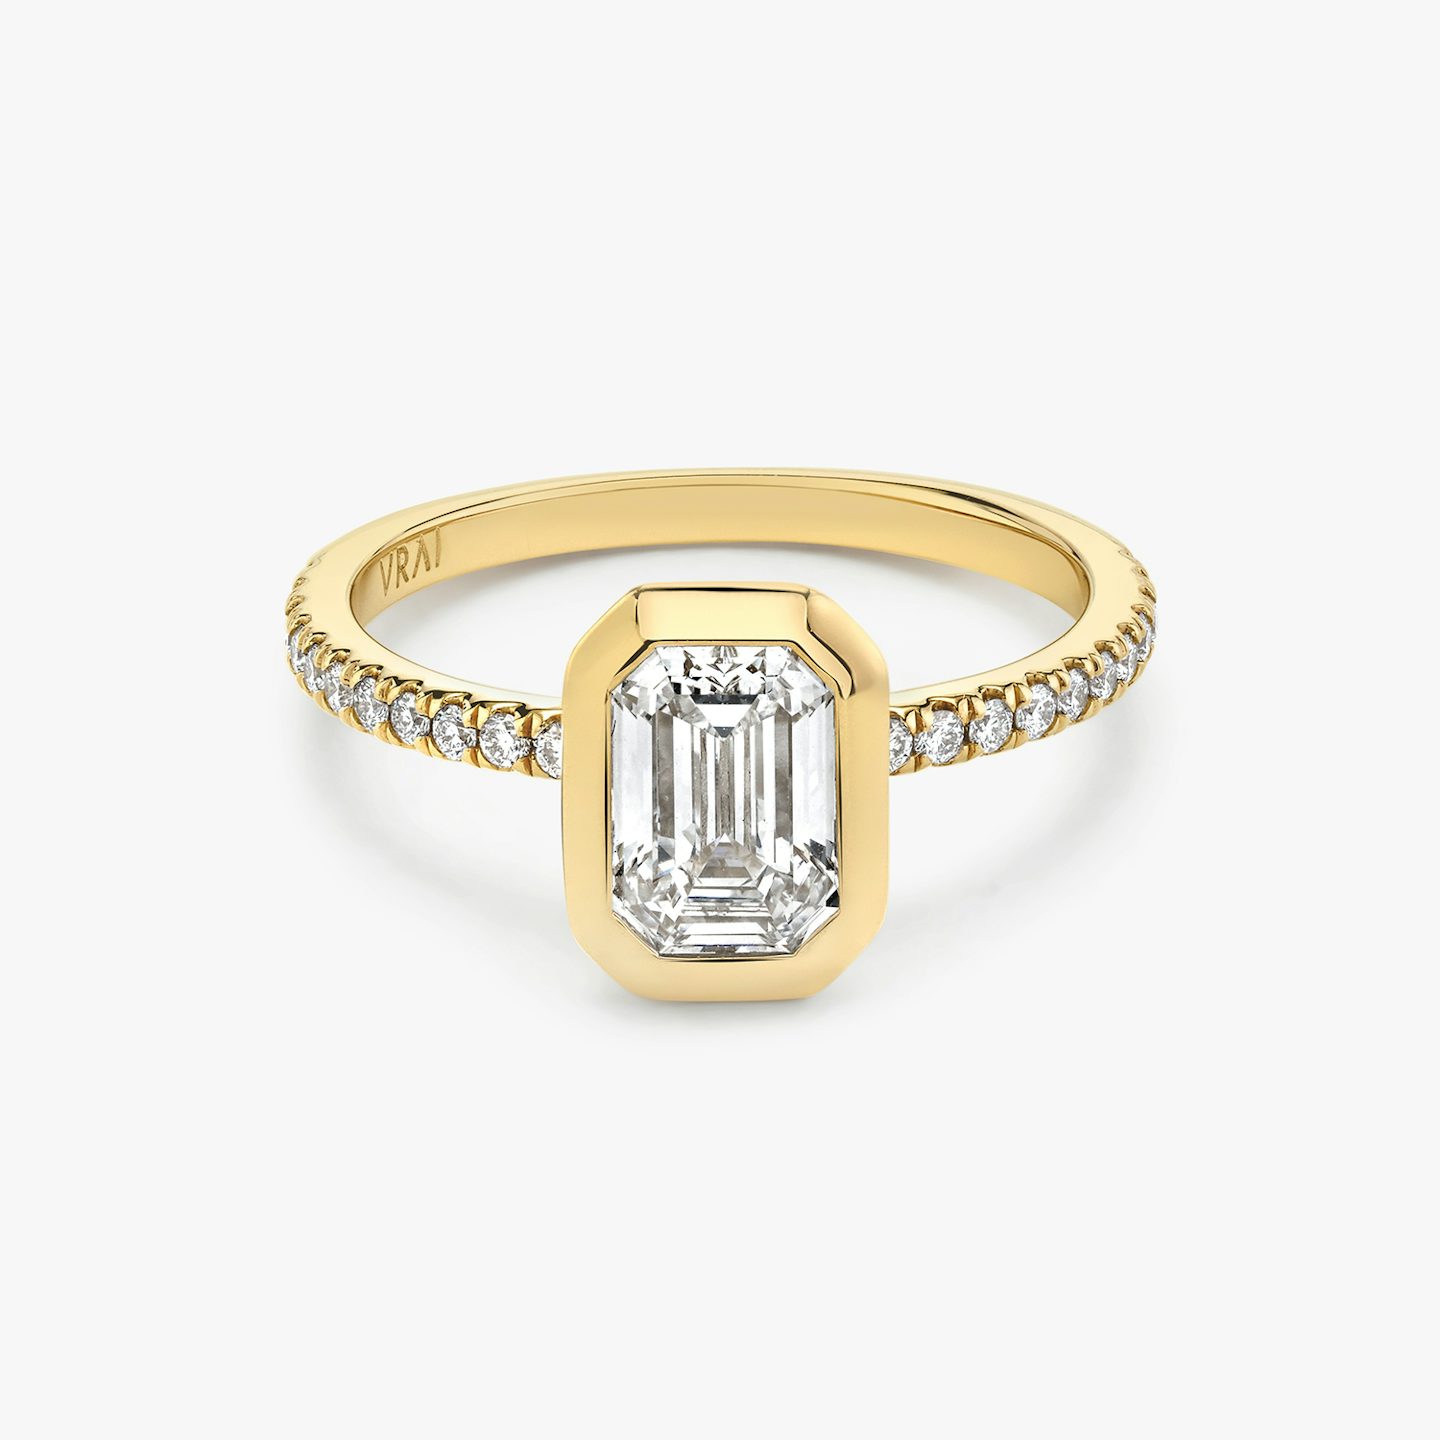 undefined | emerald | 18k | yellow-gold | bandAccent: pave | diamondOrientation: vertical | caratWeight: other